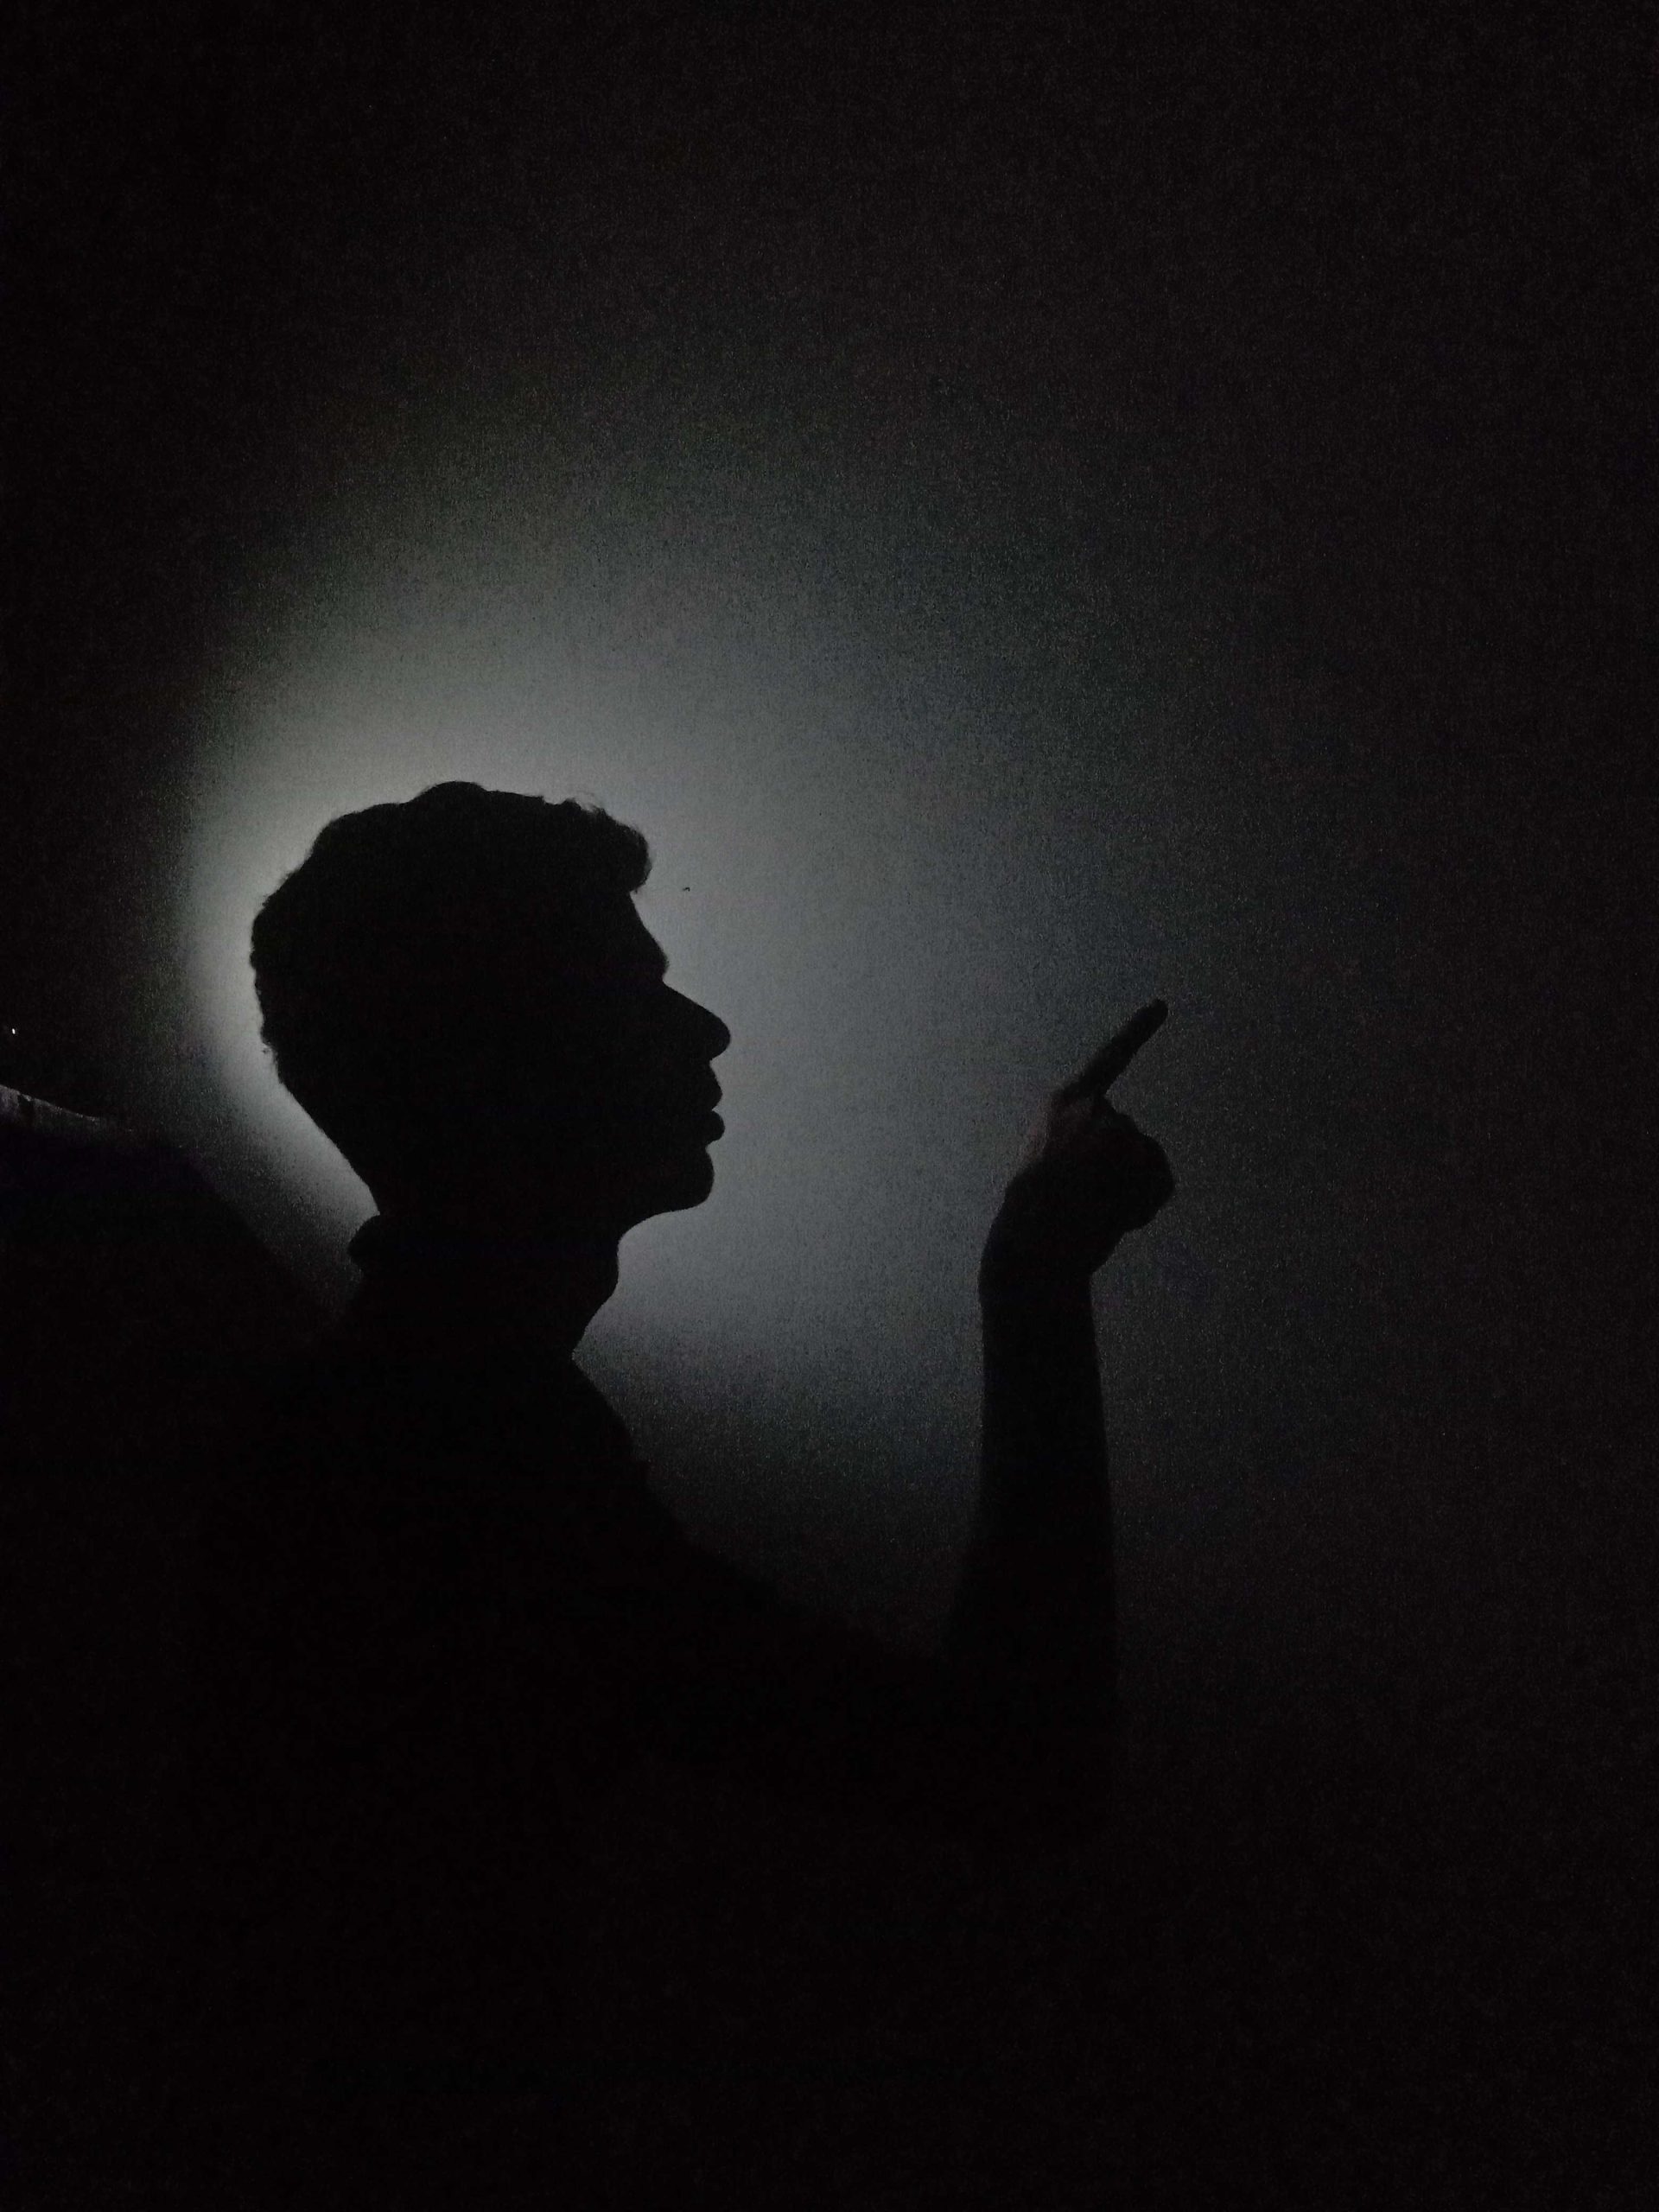 A boy pointing his finger in darkness